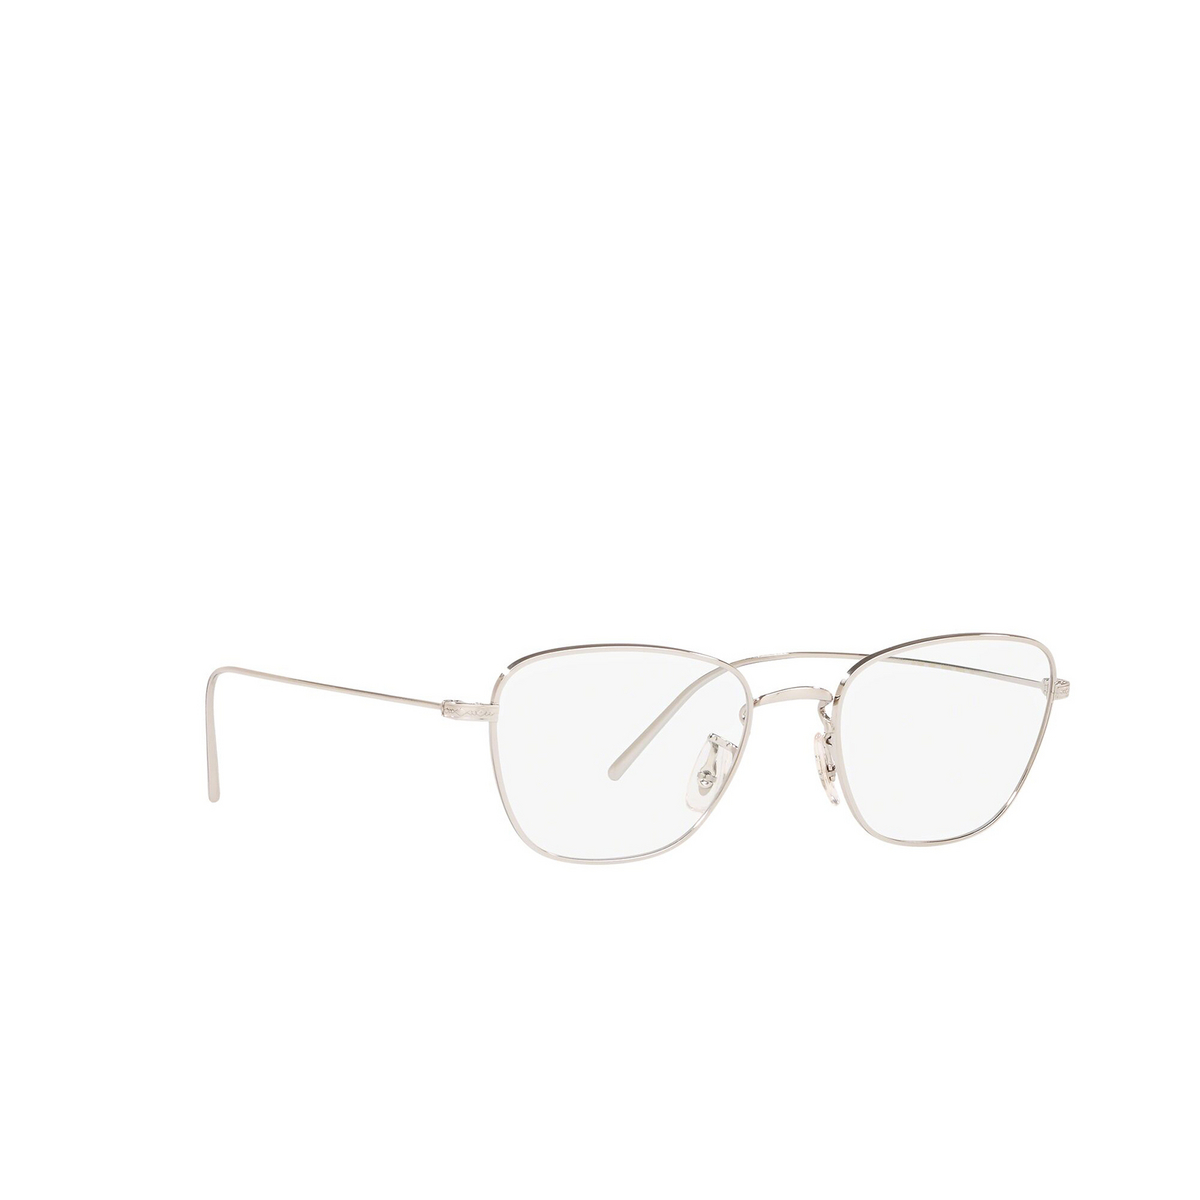 Oliver Peoples® Butterfly Eyeglasses: Suliane OV1254 color Silver 5036 - three-quarters view.